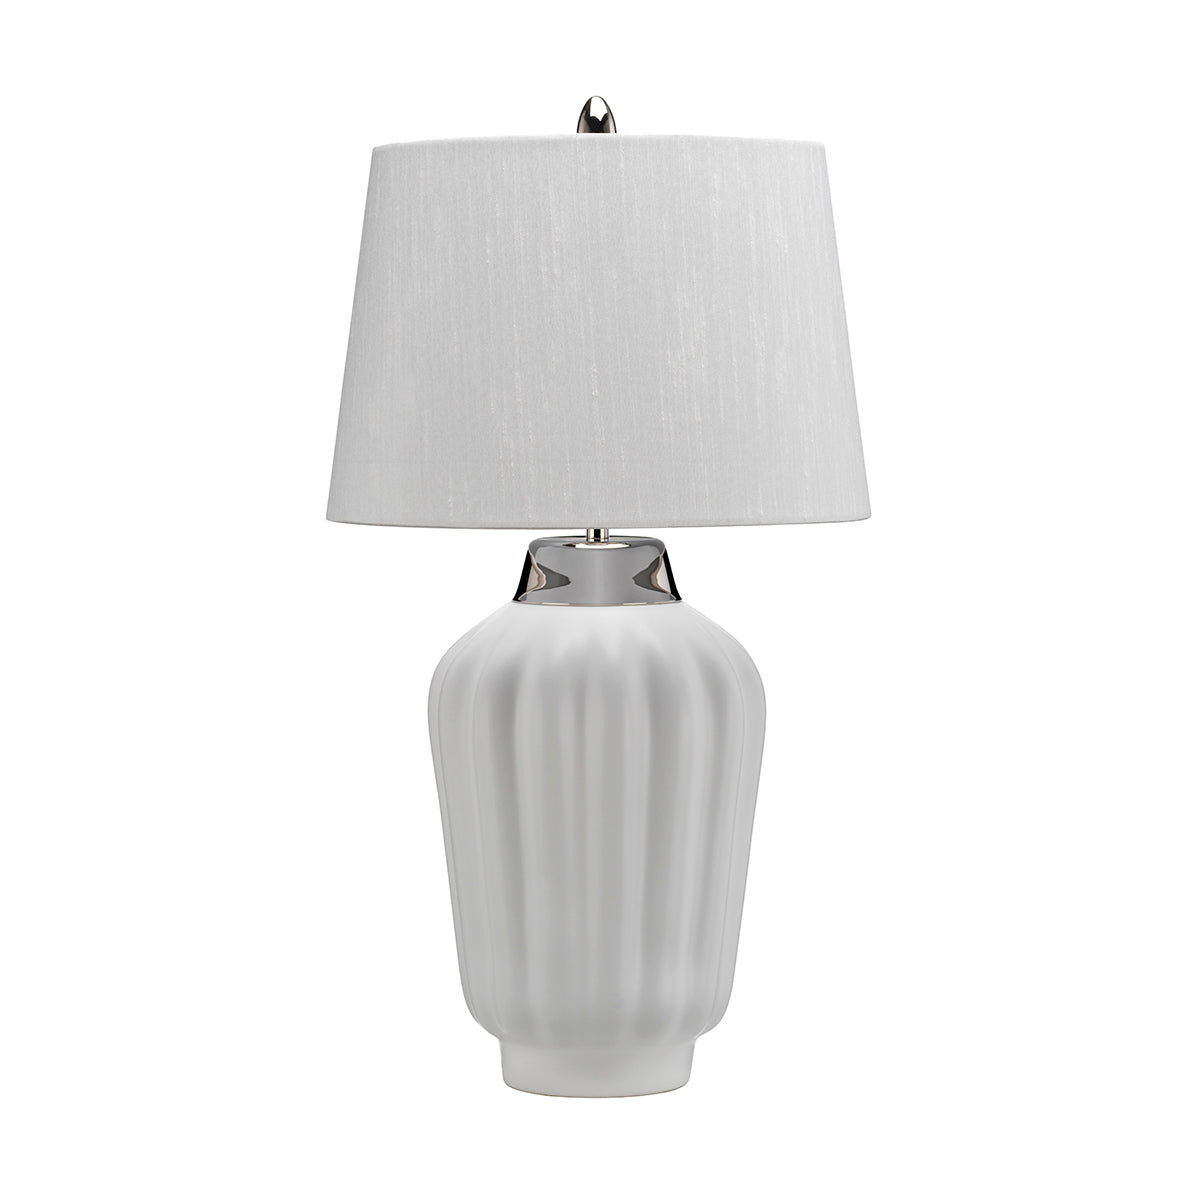 Bexley 1 Light Table Lamp - White & Polished Nickel - Quintiesse Lighting